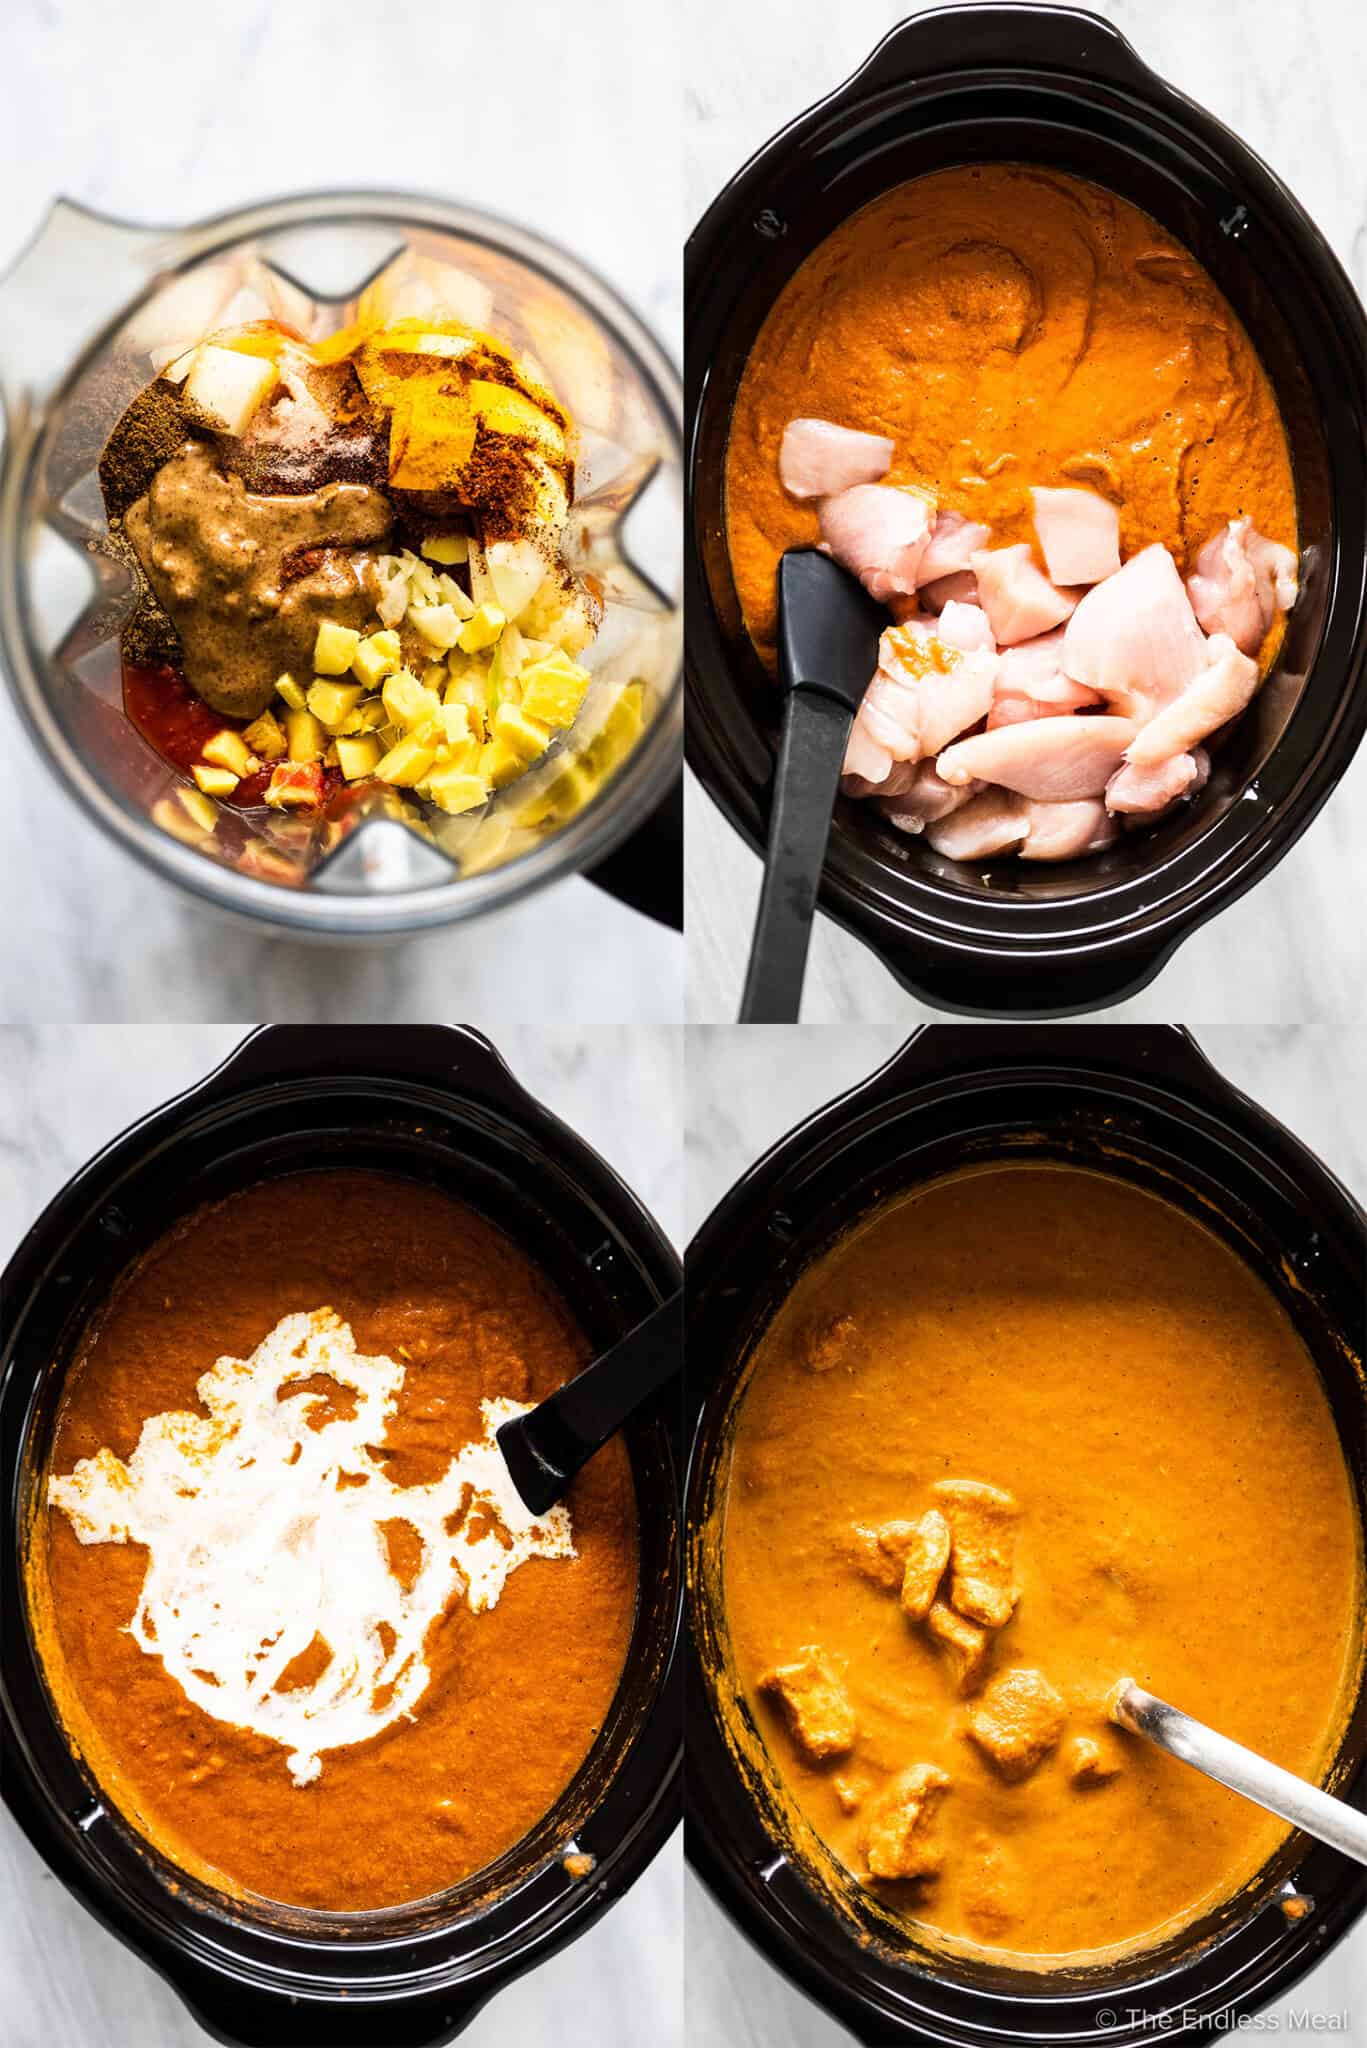 4 images showing how to make crockpot butte chicken.